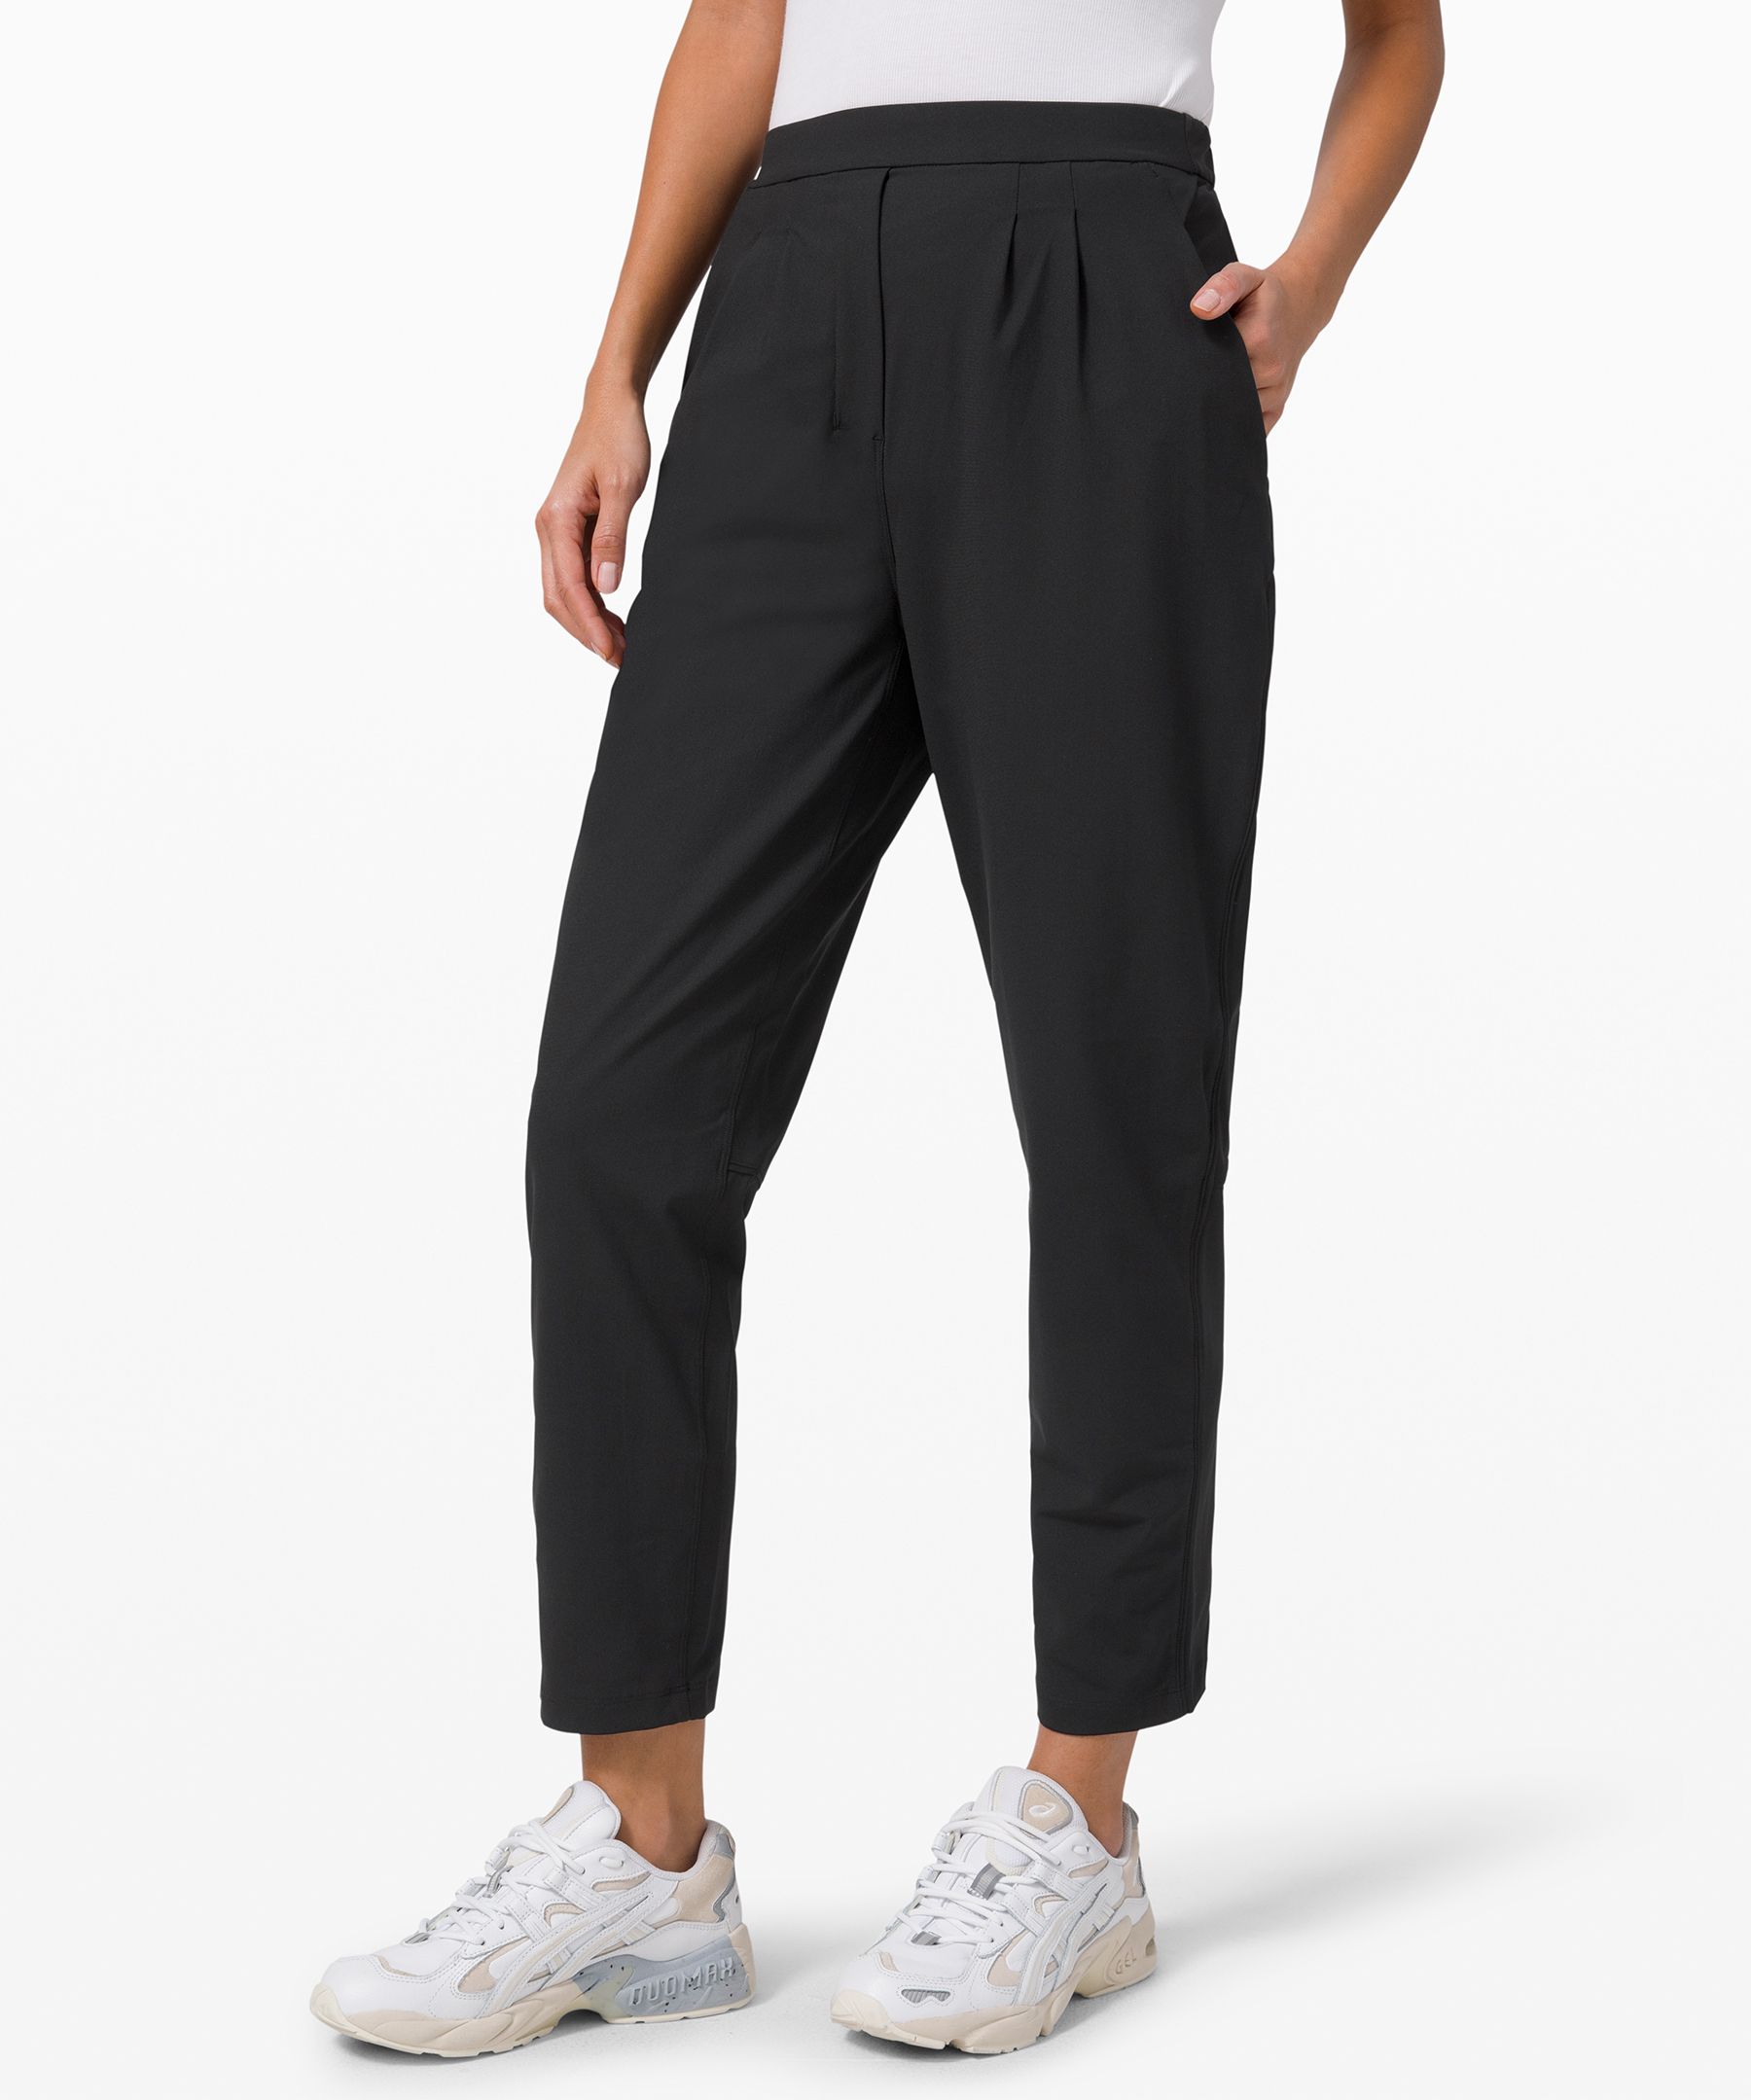 Lululemon Essential High Rise Trouser Size 2 Front Pleated Pants